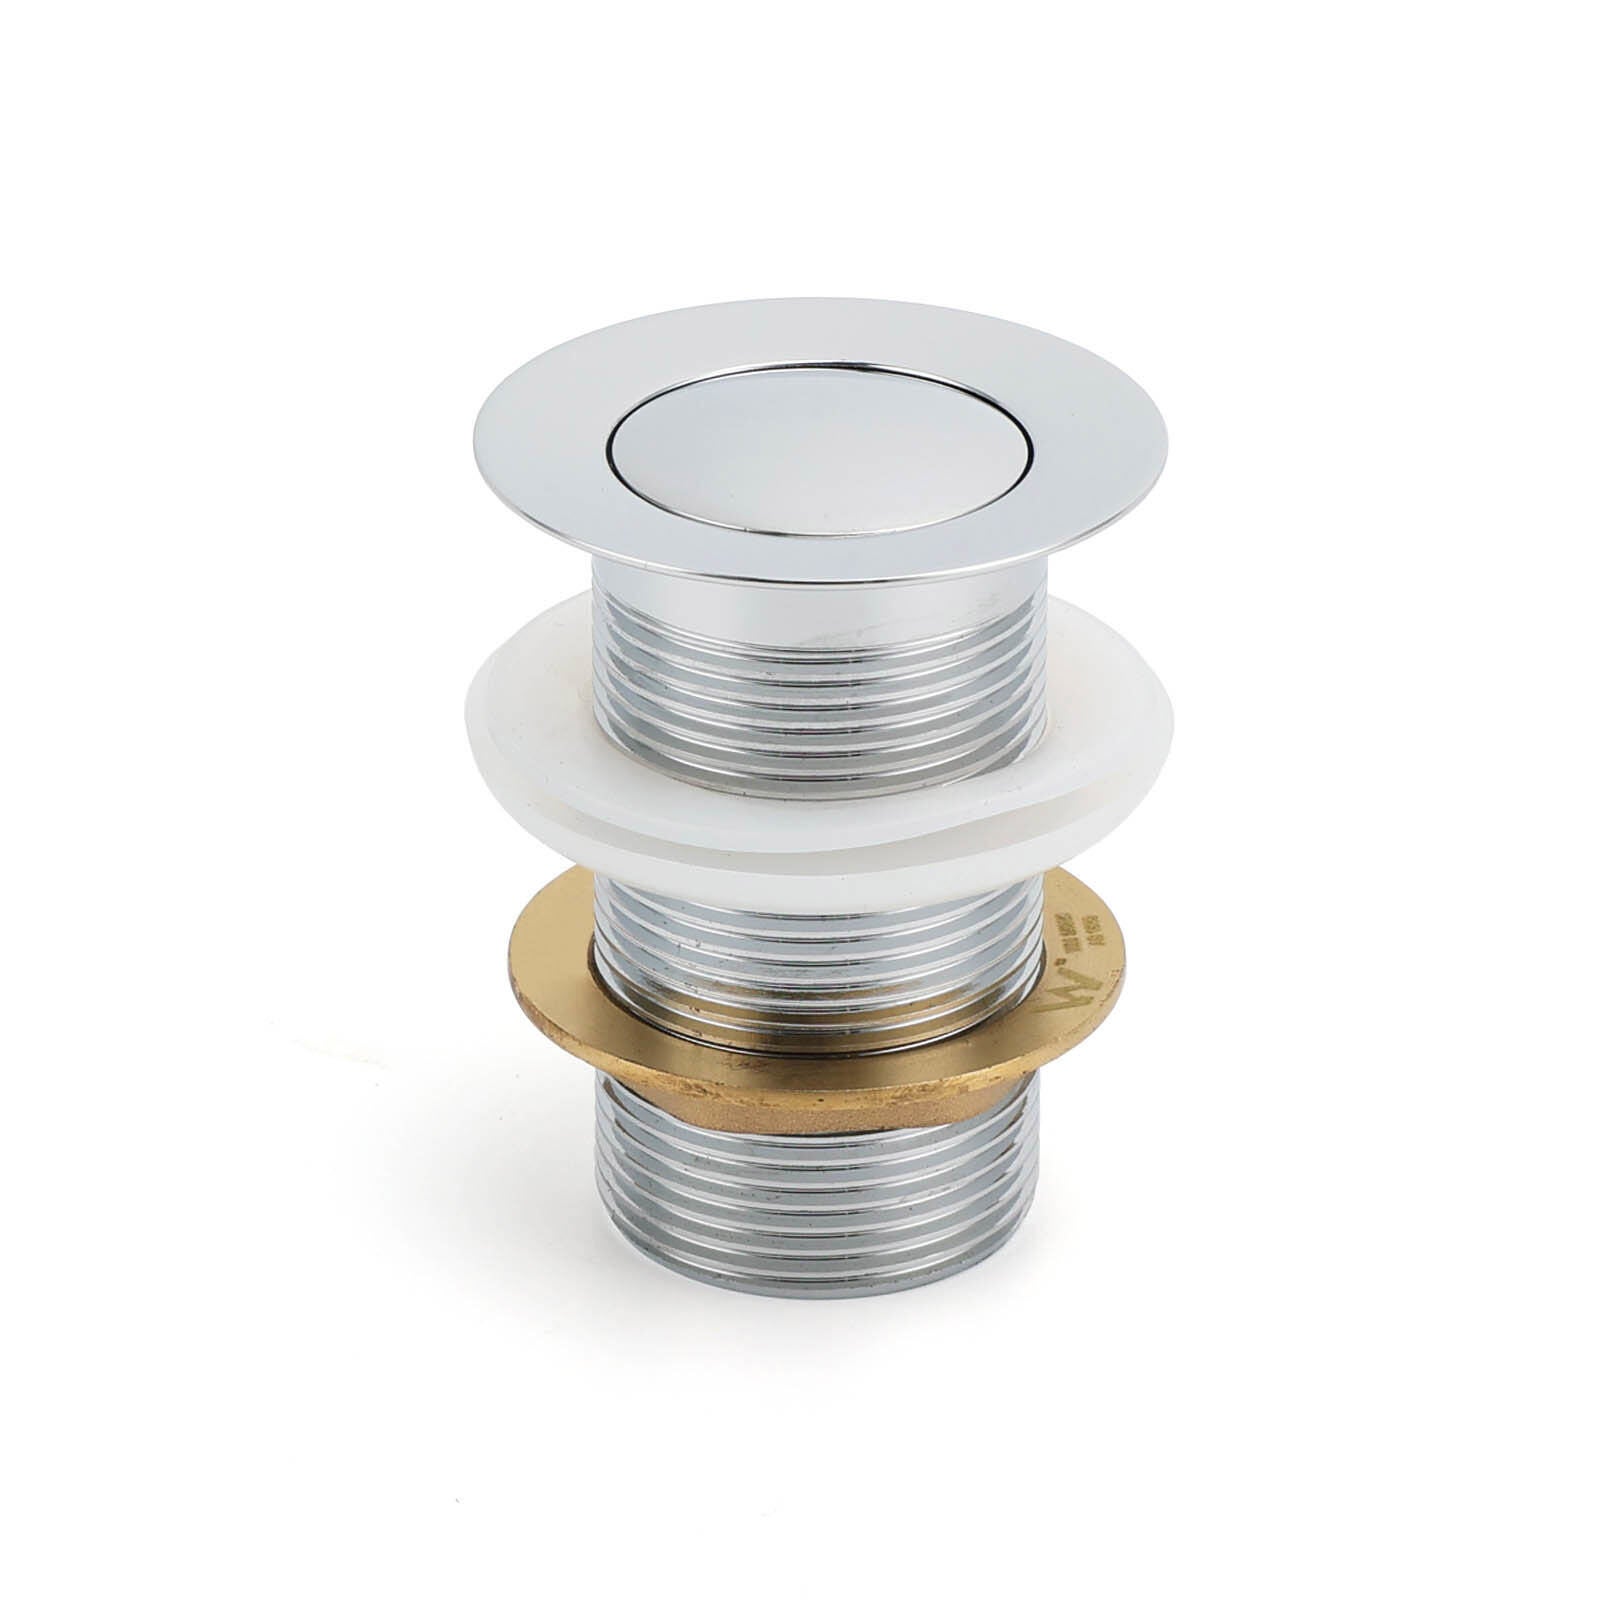 Watermark 32mm Pop Up Push Brass Waste Plug Without Overflow Basin Drain Outlet